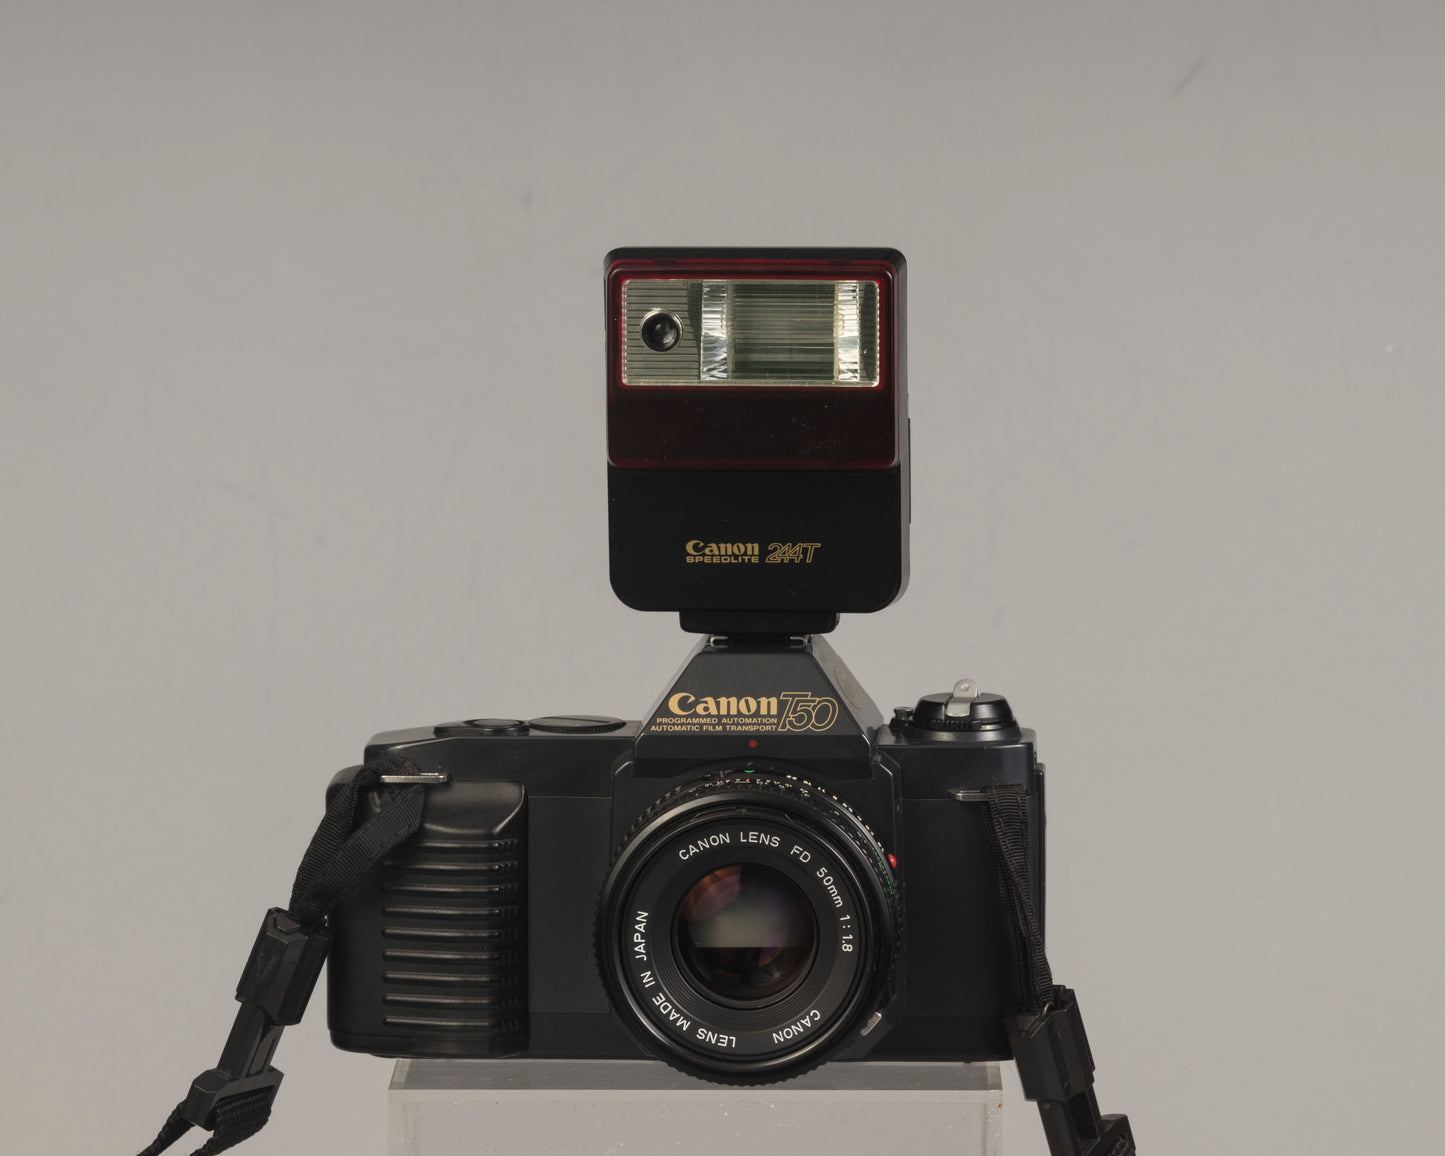 The Canon T50 35mm film SLR with the Canon FD 50mm f1.8 lens and Canon 244T Speedlite